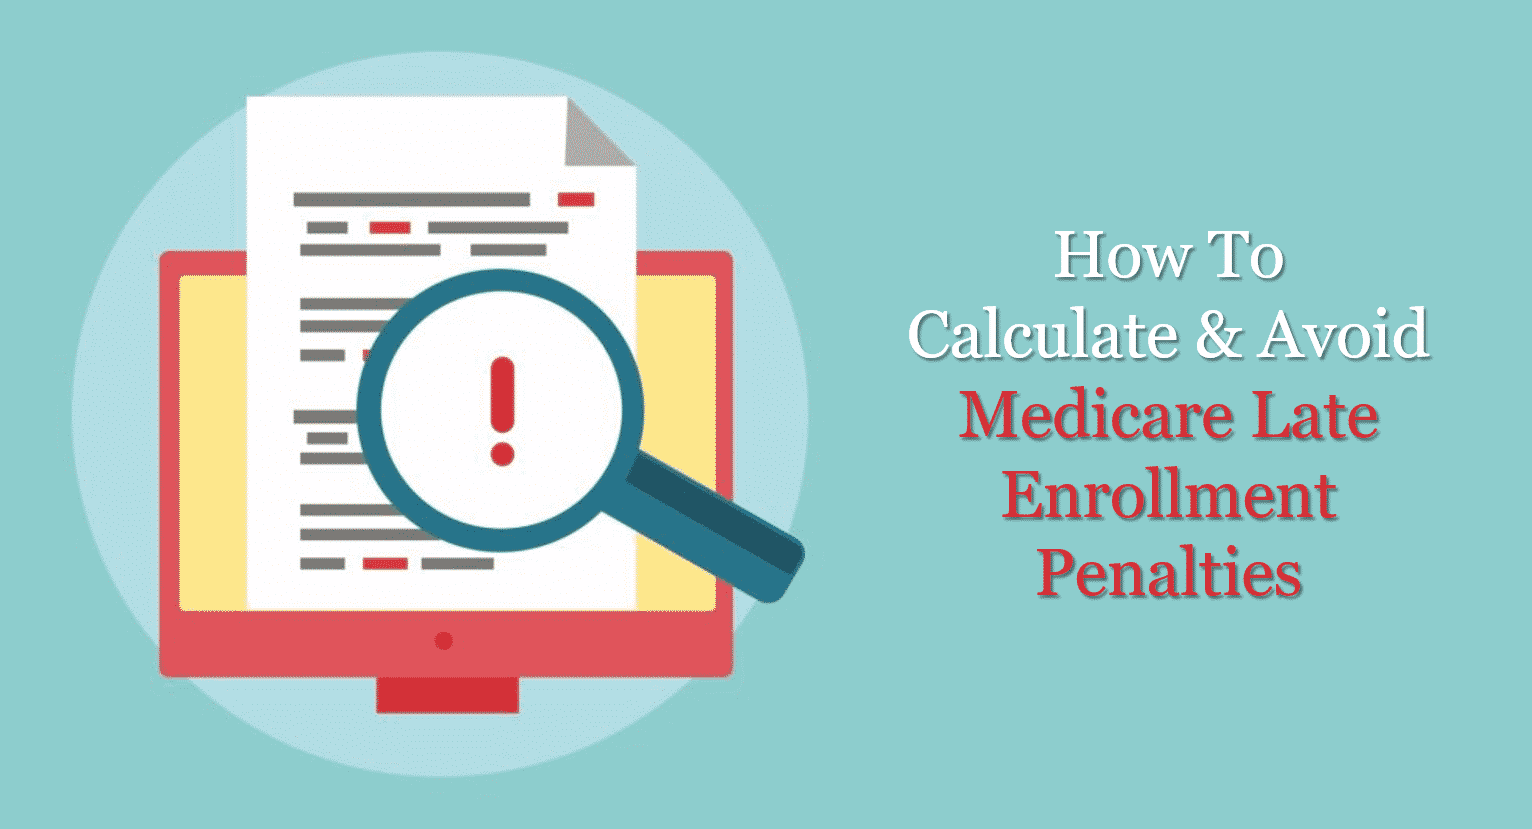 How To Calculate & Avoid Medicare Late Enrollment Penalties